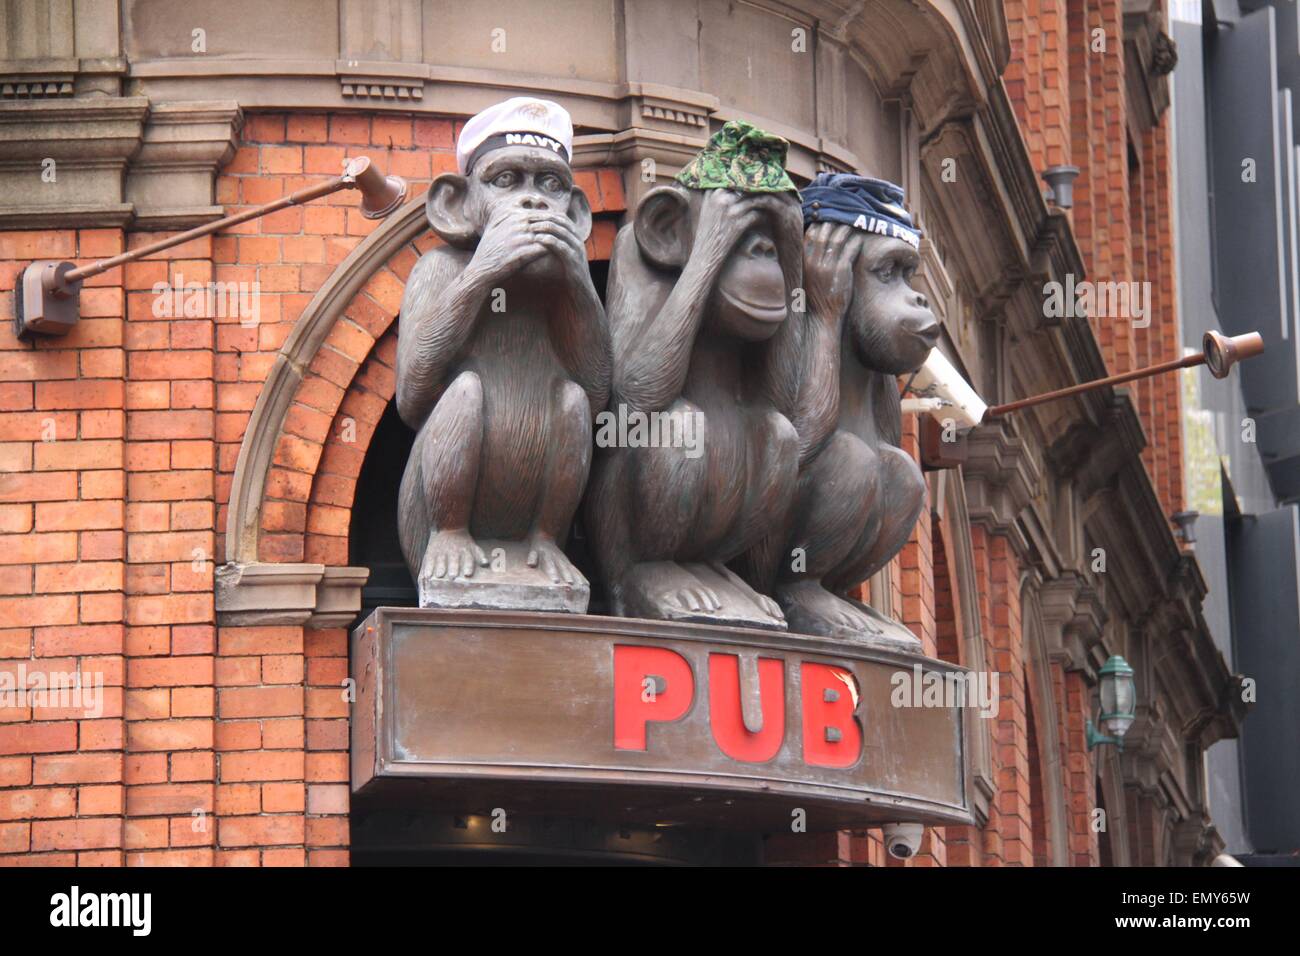 Sydney, Australia. 24 April 2015. The three monkeys wear hats representing the navy, army and air force at the 3 Wise Monkeys pub at 555 George St, Sydney ahead of ANZAC Day. Credit: Richard Milnes/Alamy Live News Stock Photo